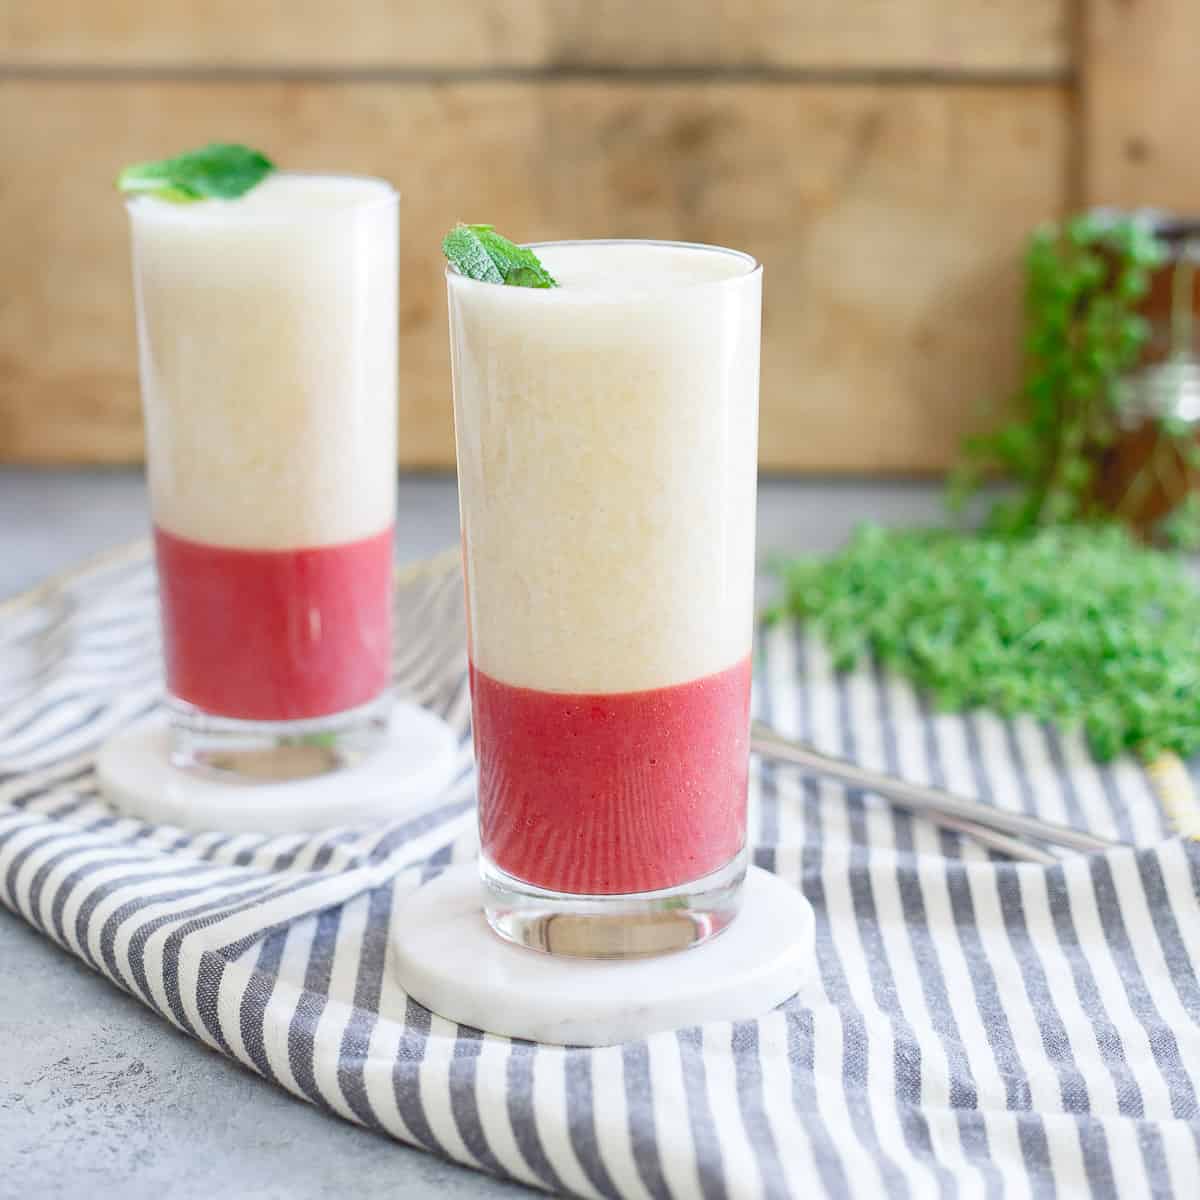 This layered strawberry ginger peach smoothie is refreshing and fruit forward with a healthy dose of protein from ultra-filtered milk.